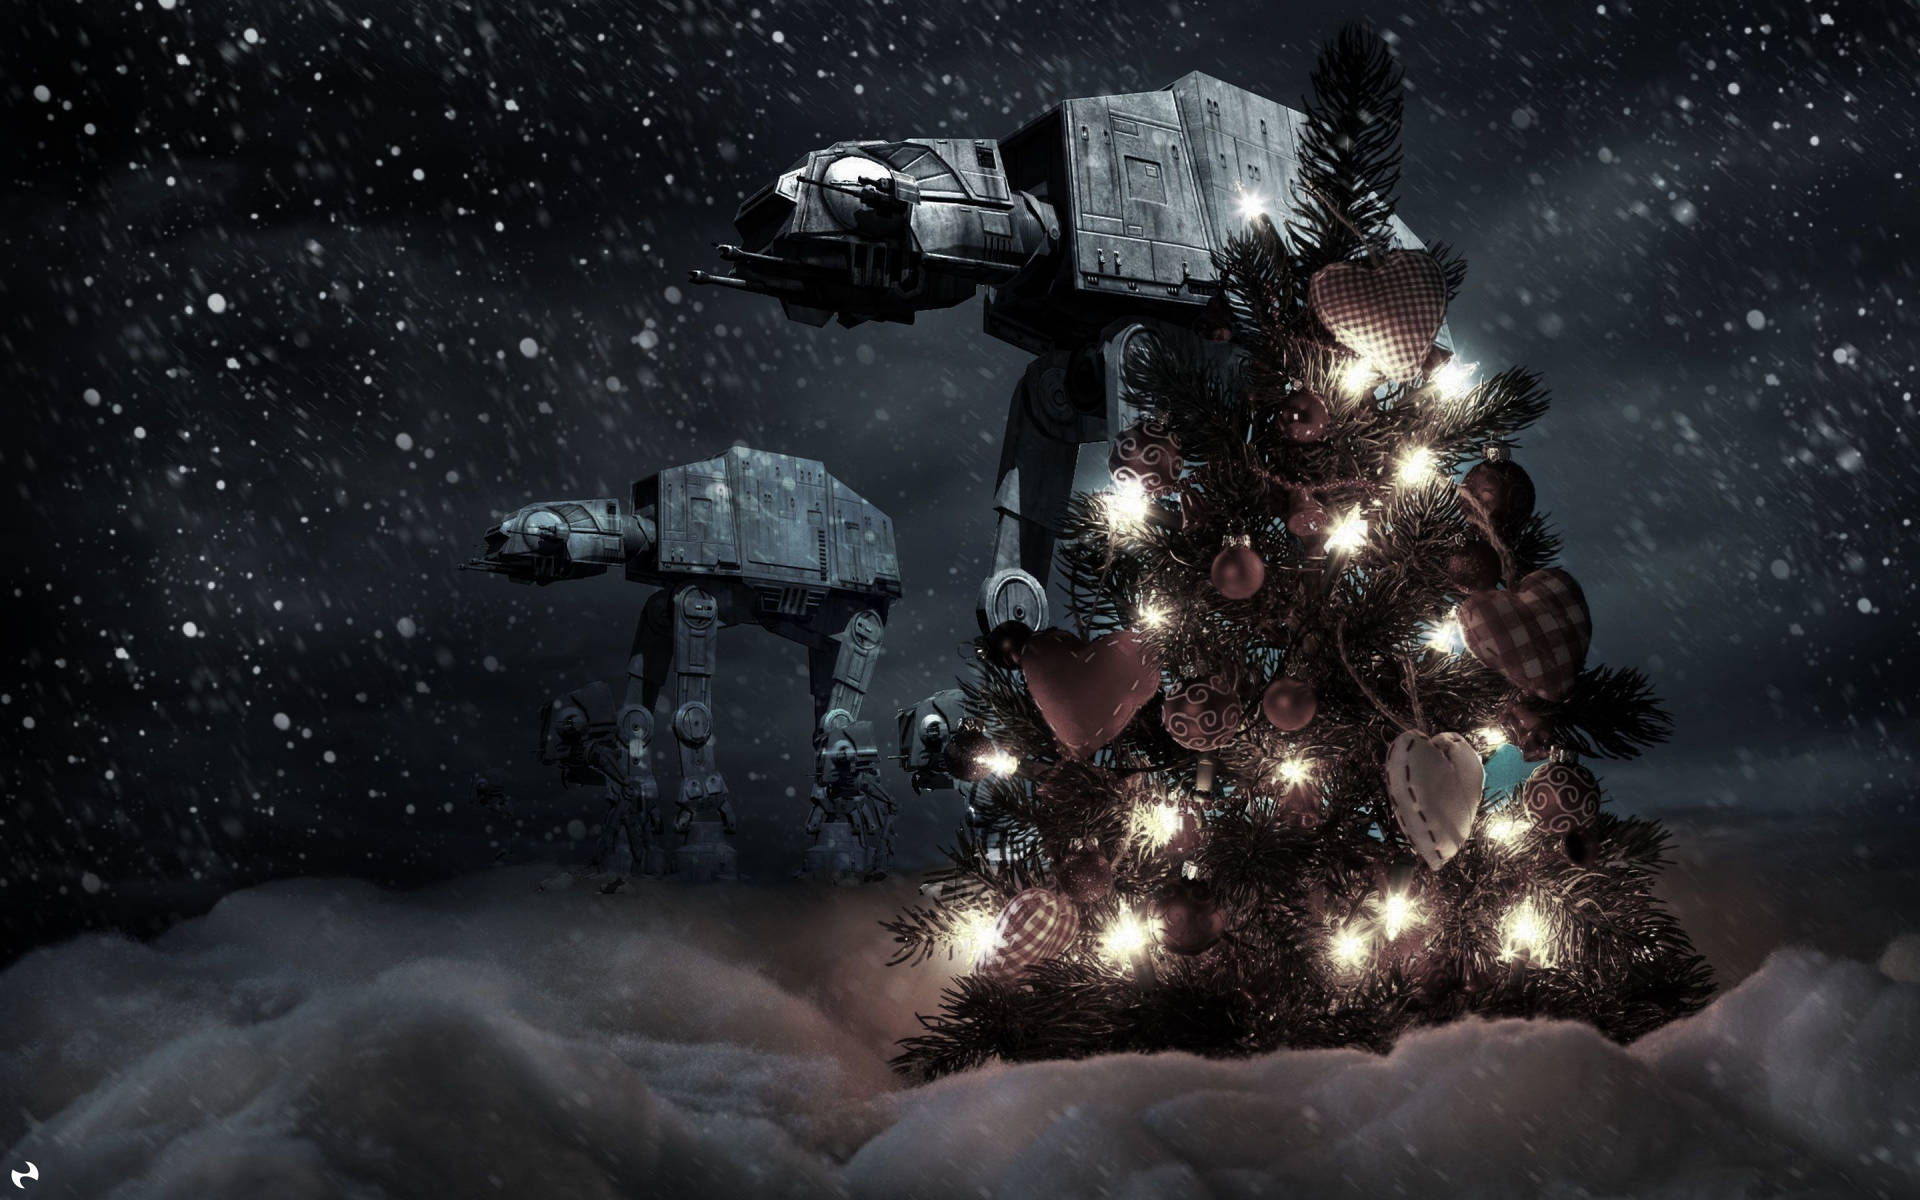 Celebrate The Holidays With Star Wars Background